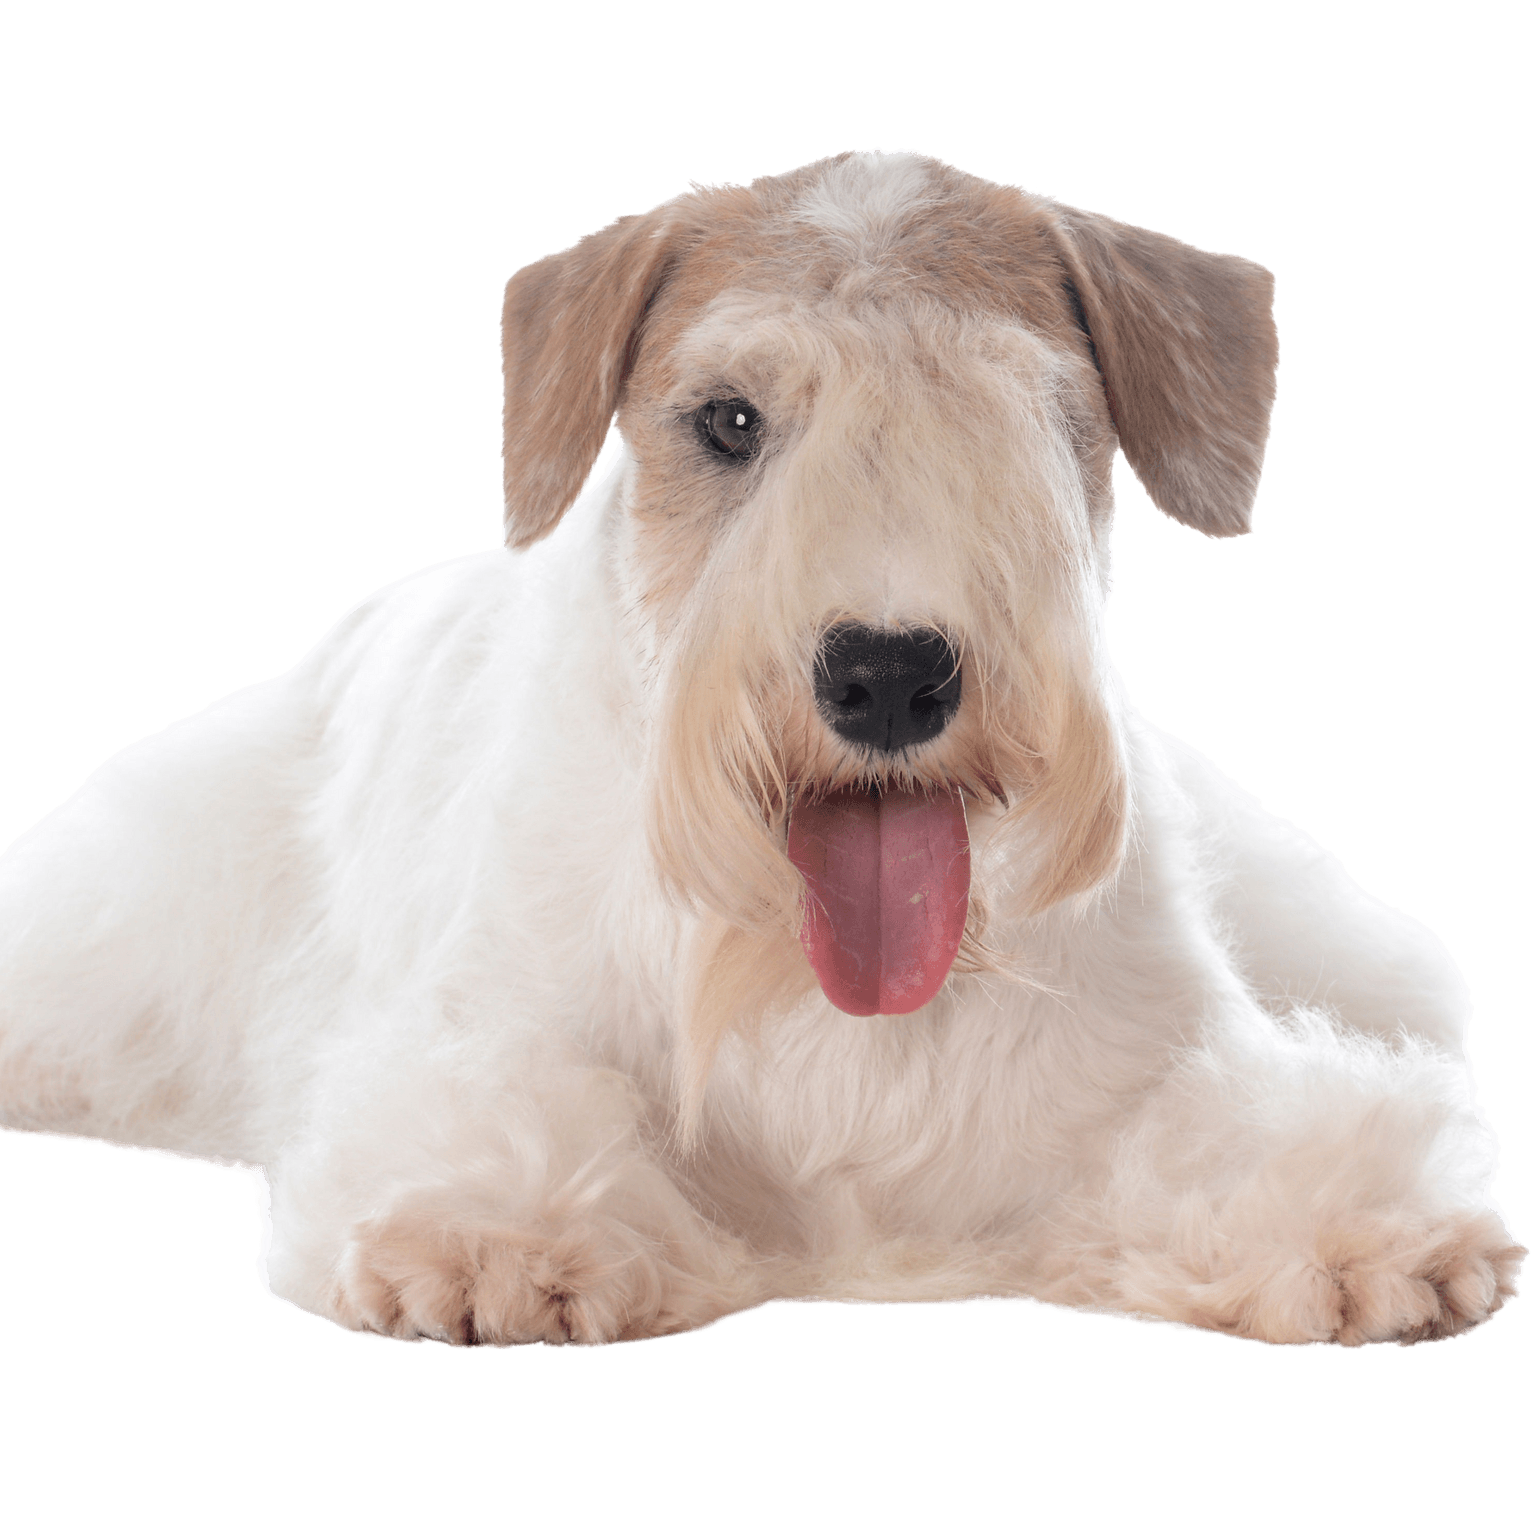 Sealyham Terrier breed description, city dog, small beginner dog white with wavy coat, triangle ears, dog with lots of hair on muzzle, family dog, dog breed from Wales, dog breed from England, British dog breed